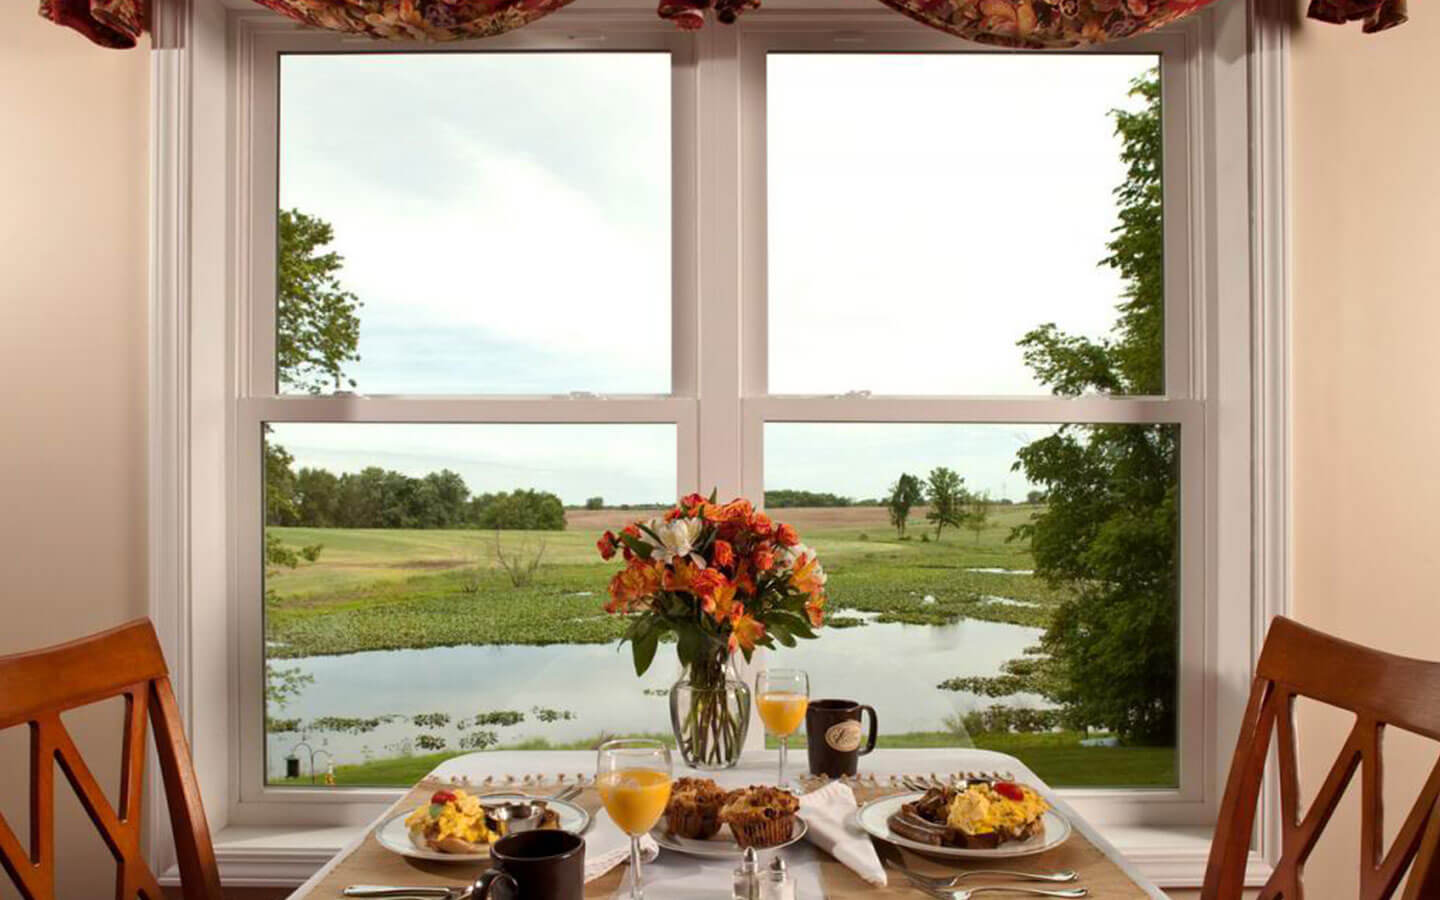 Breakfast with a View at Castle In The Country